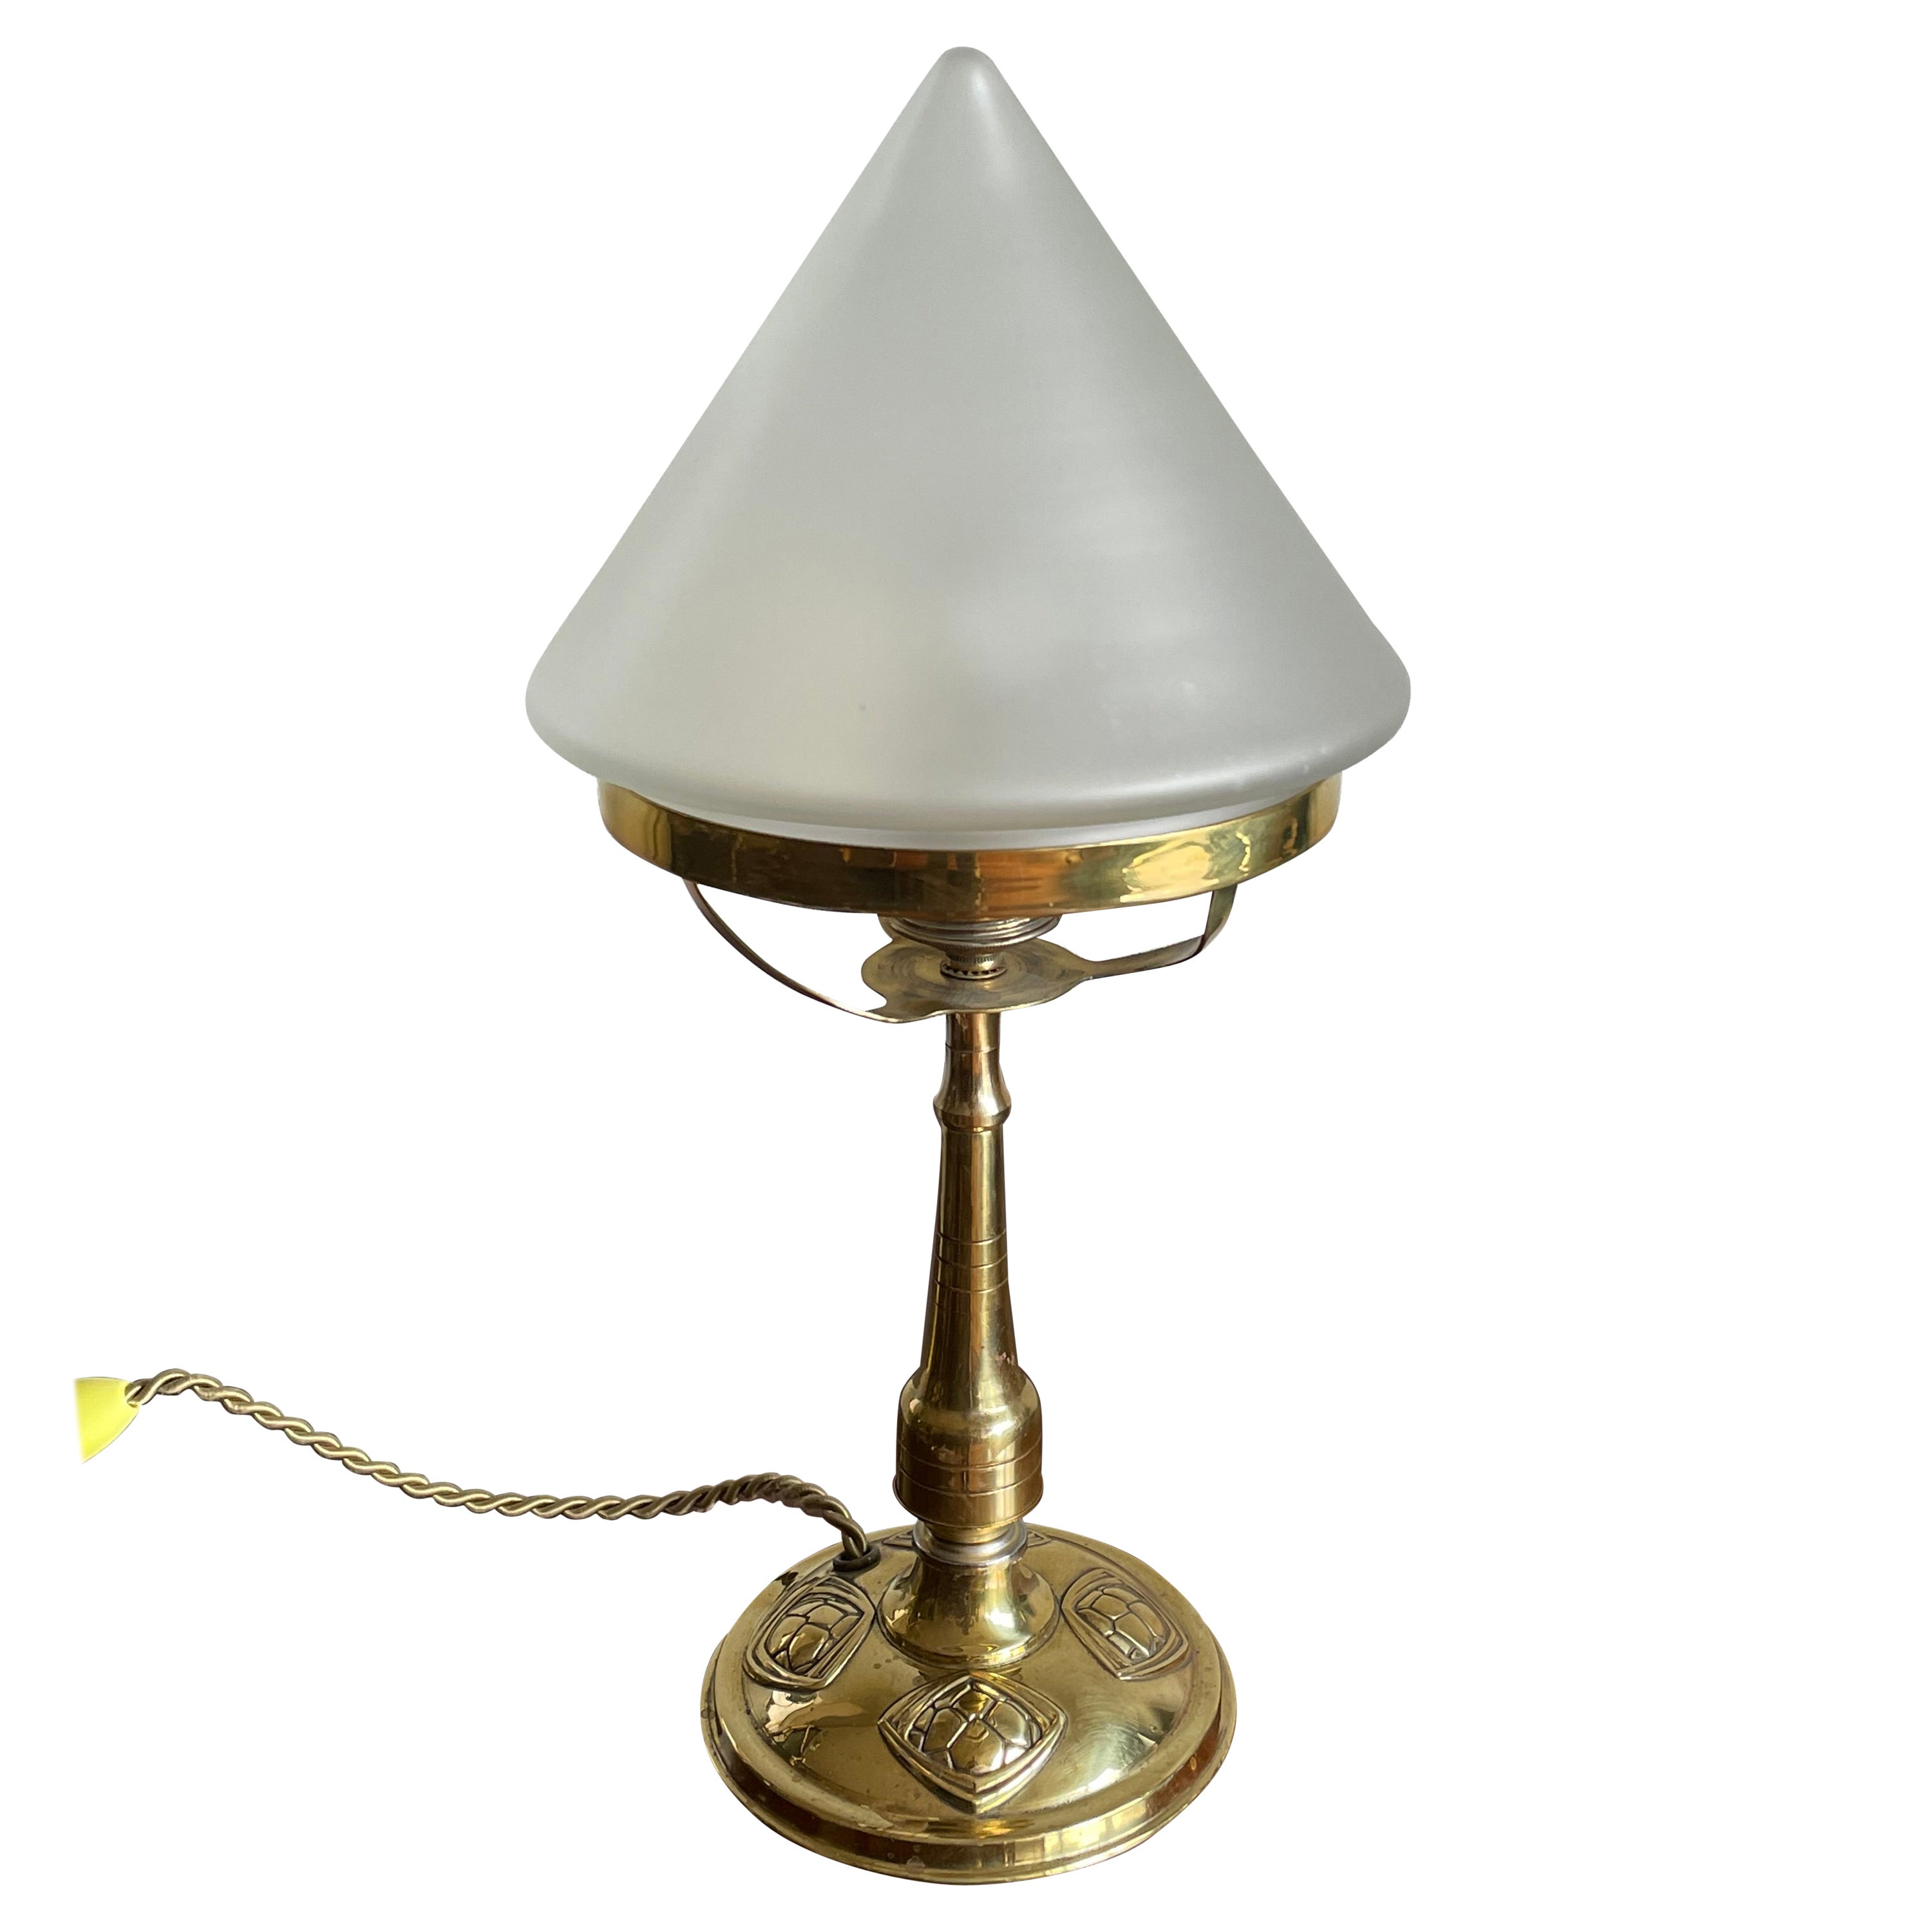 Unique Early 1900s Arts and Crafts, Fine Brass & Mint Glass Table or Desk Lamp For Sale